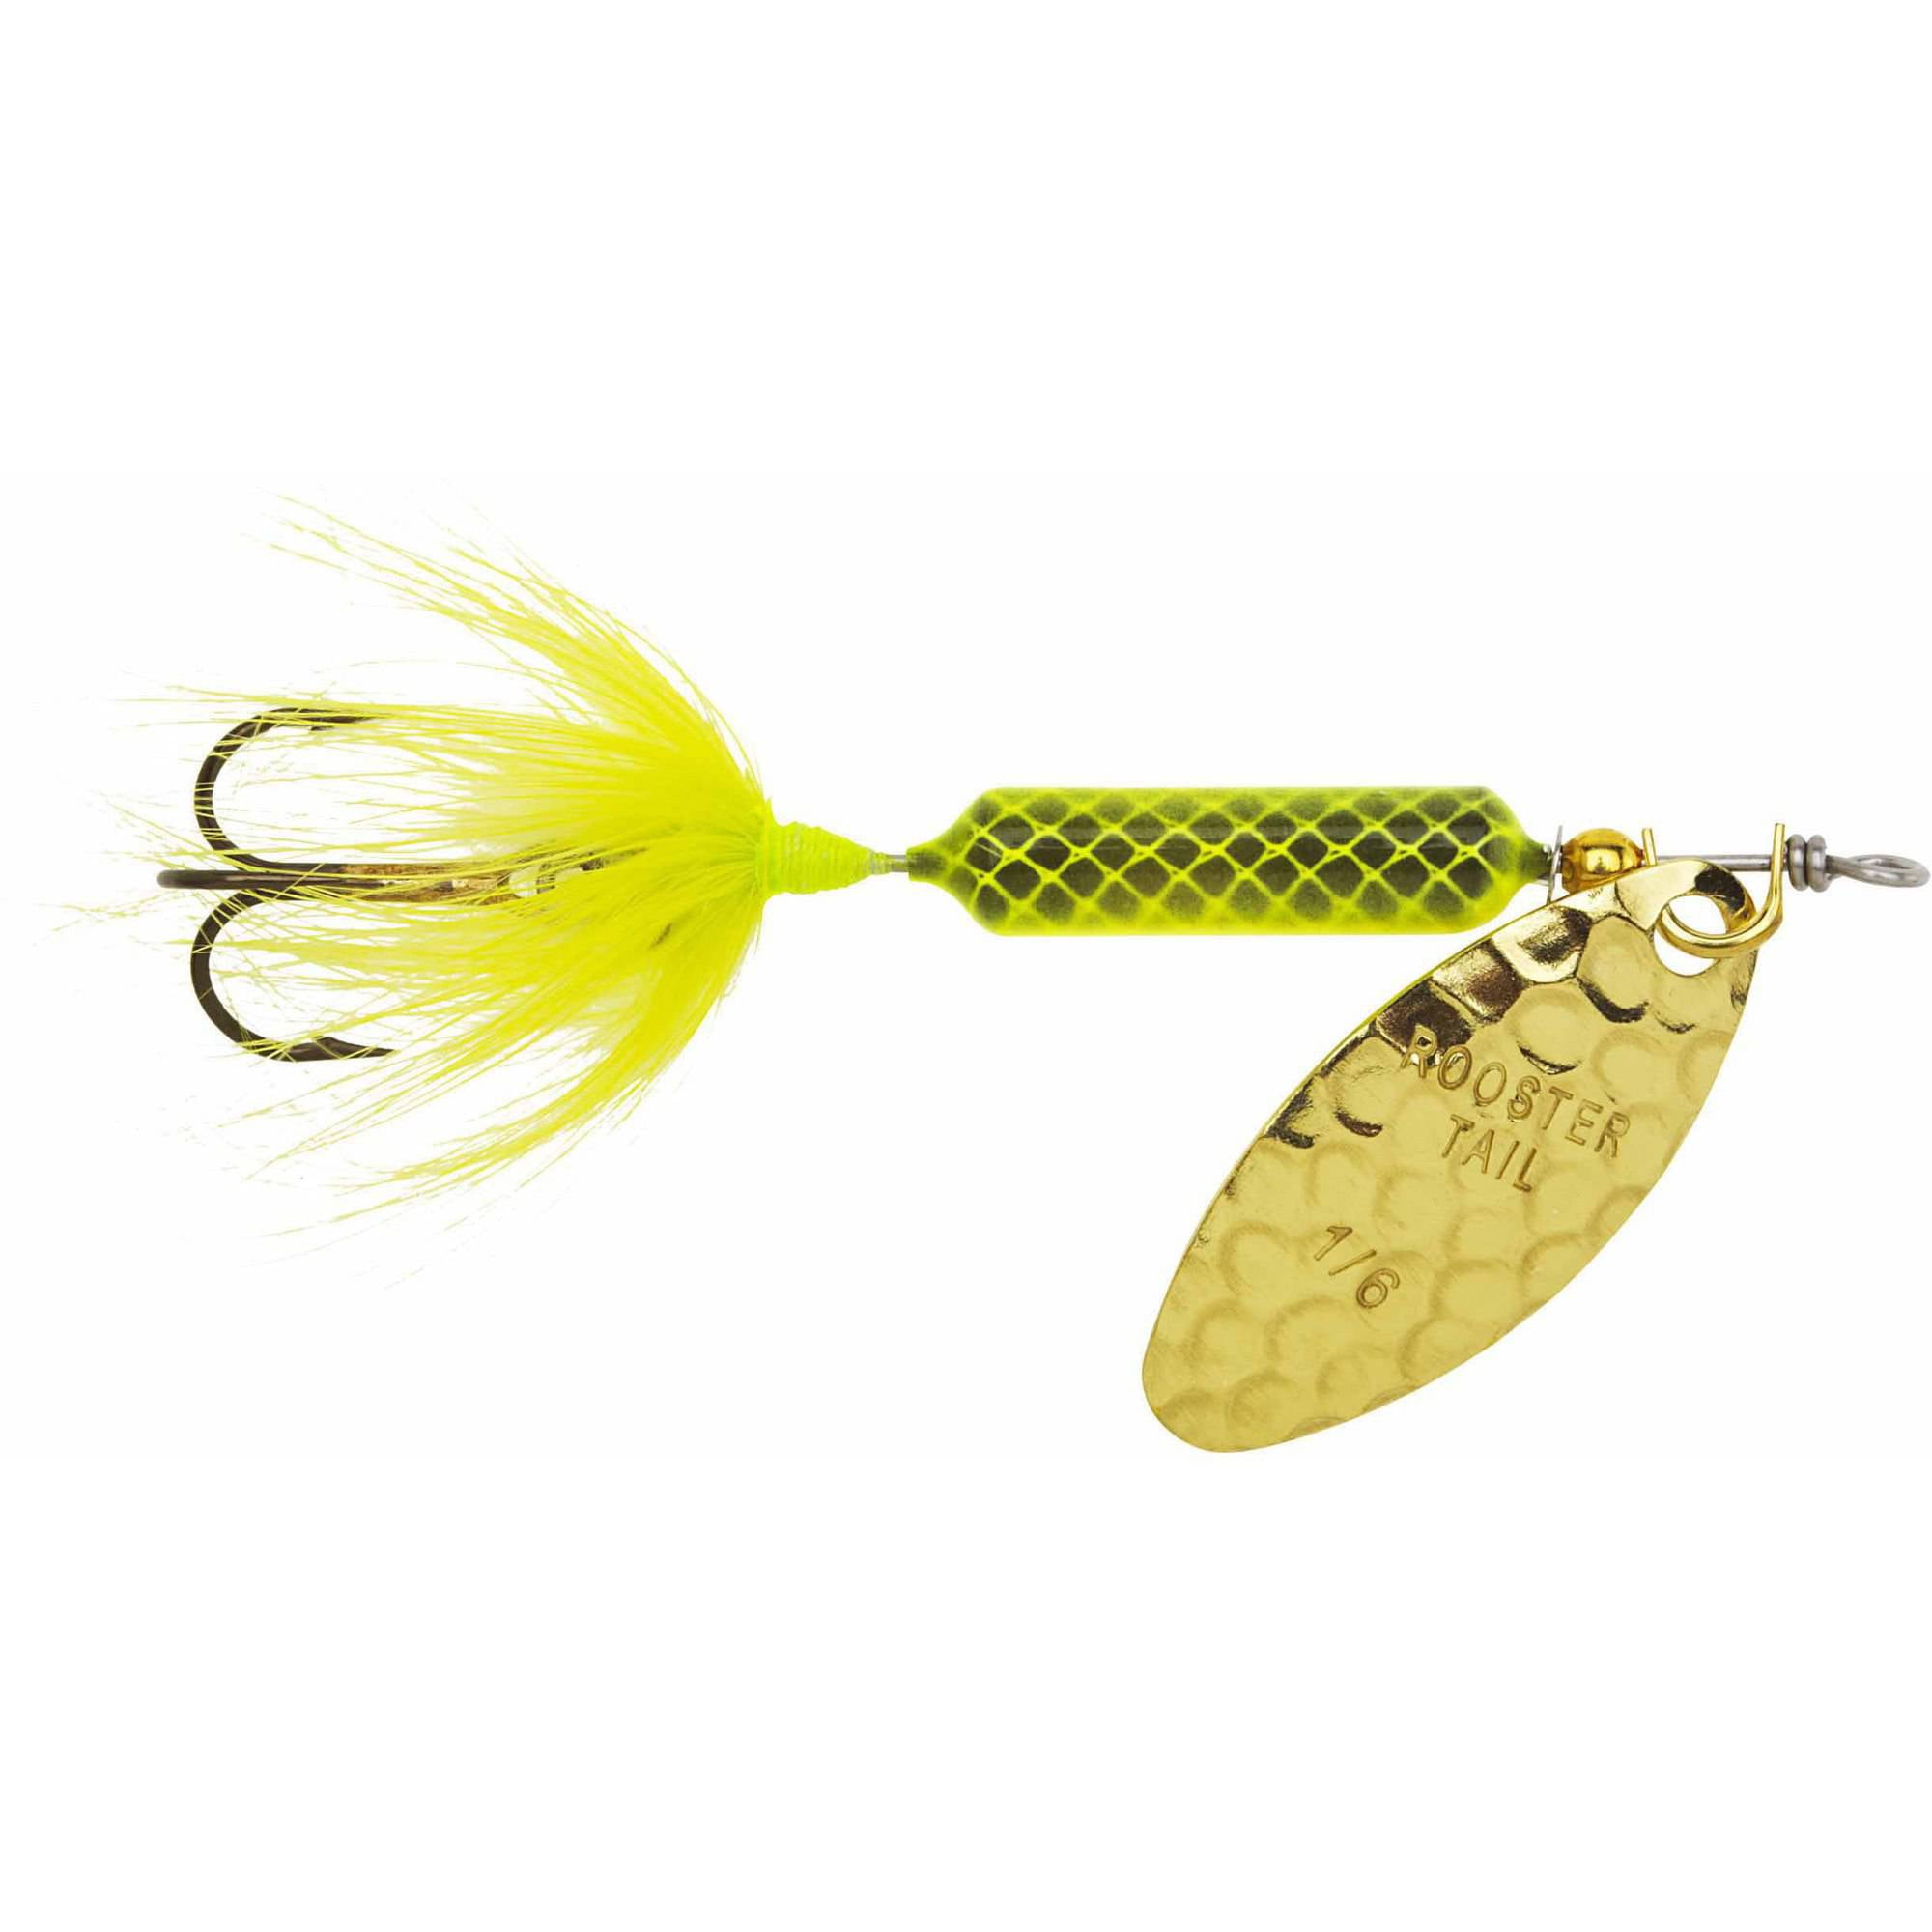 Worden's Rooster Tail, 1/4 oz, Hammered Brass Chartreuse